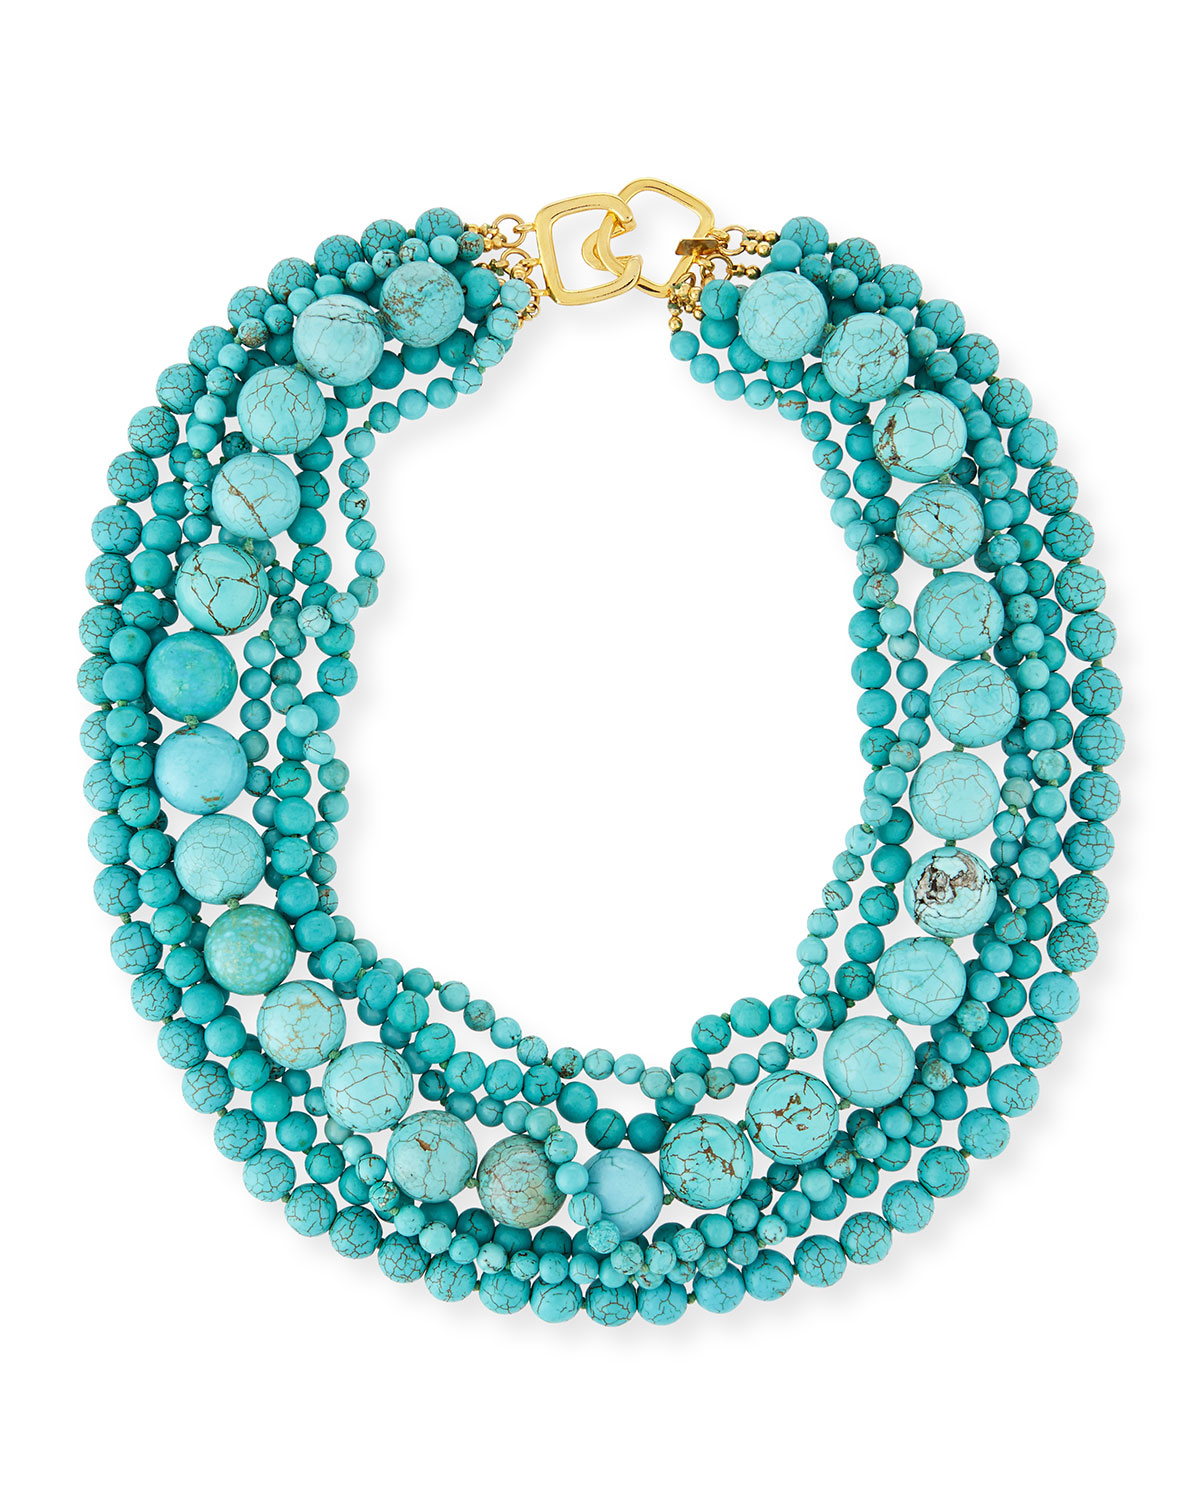 Kenneth jay lane Stabilized-turquoise Bead Multistrand Necklace in Blue ...